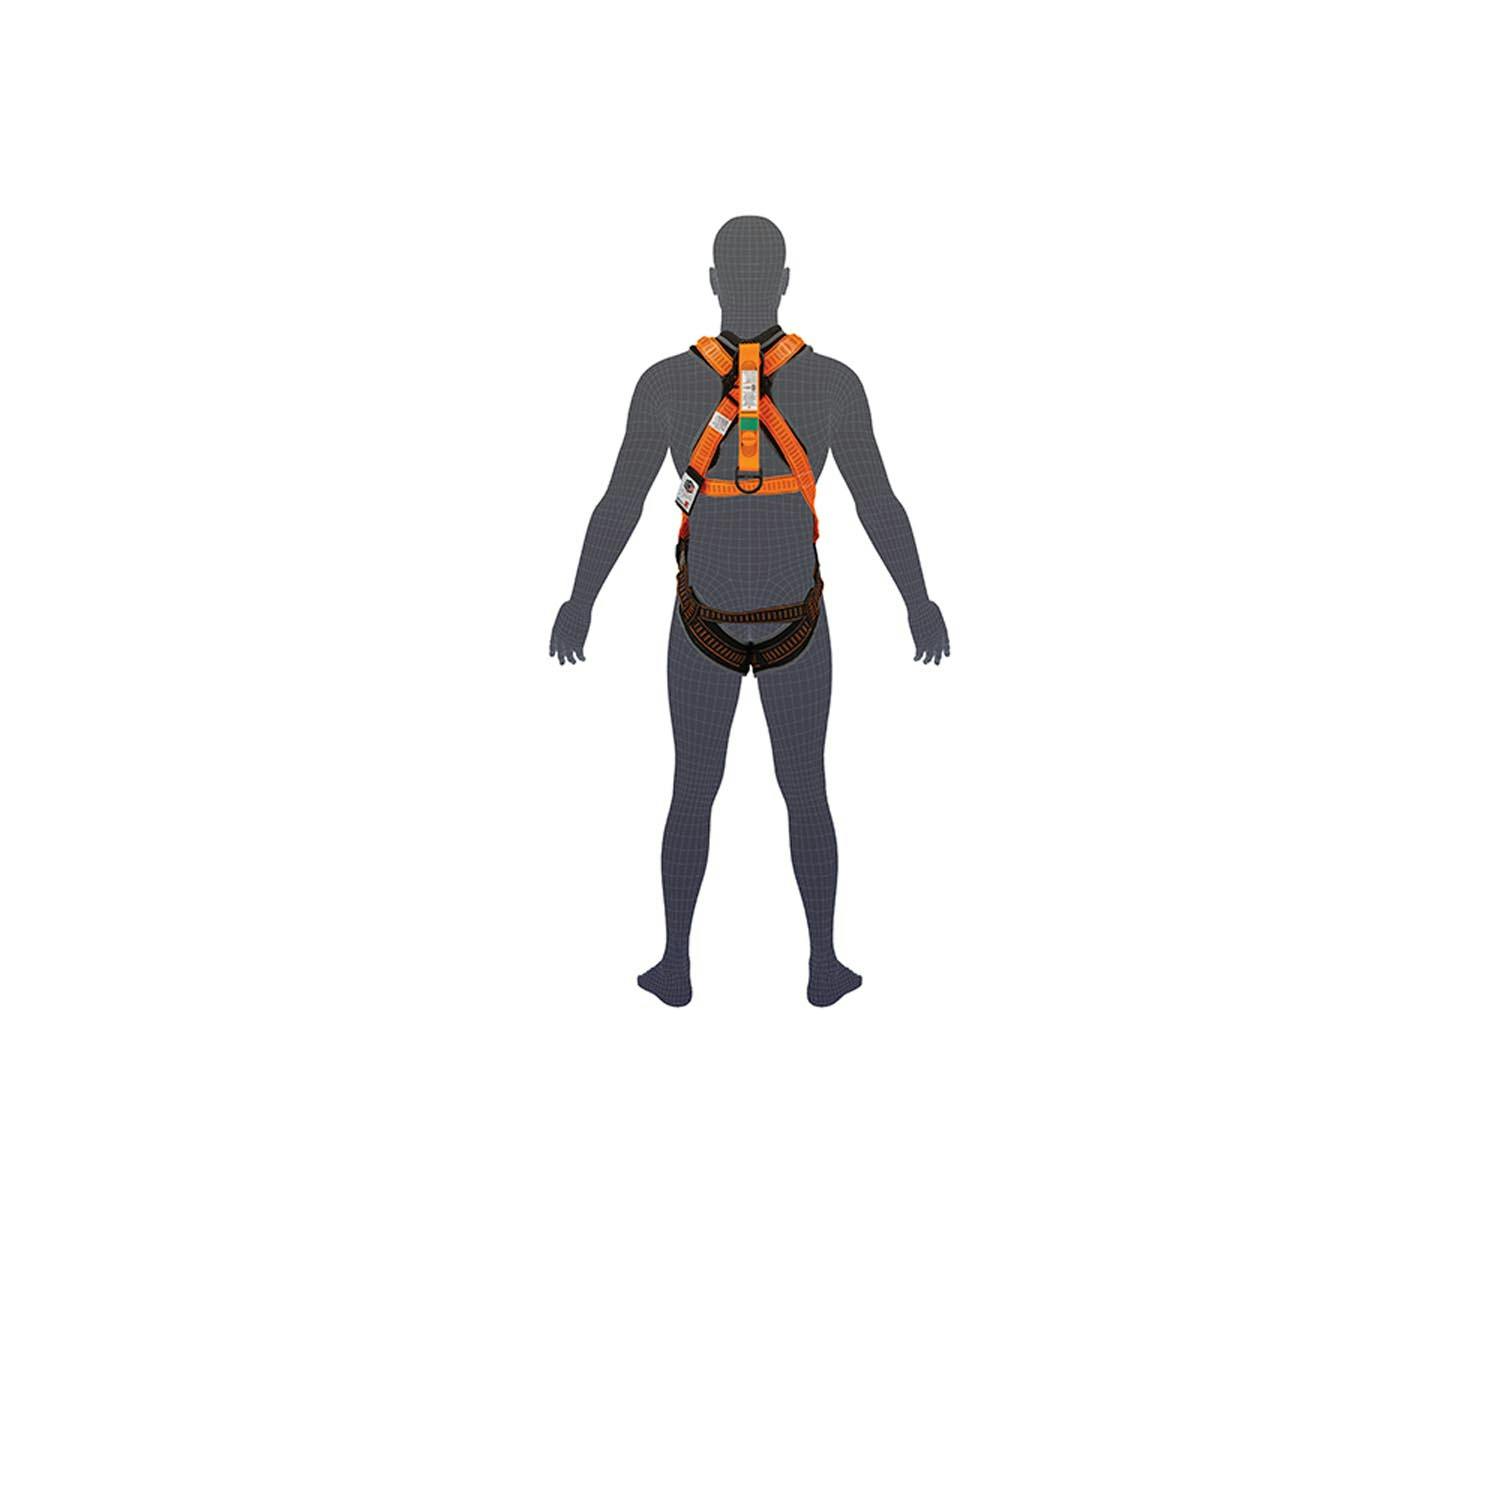 LINQ Elite Riggers Harness With Dorsal Extension Strap Cw Harness Bag (Nbhar)